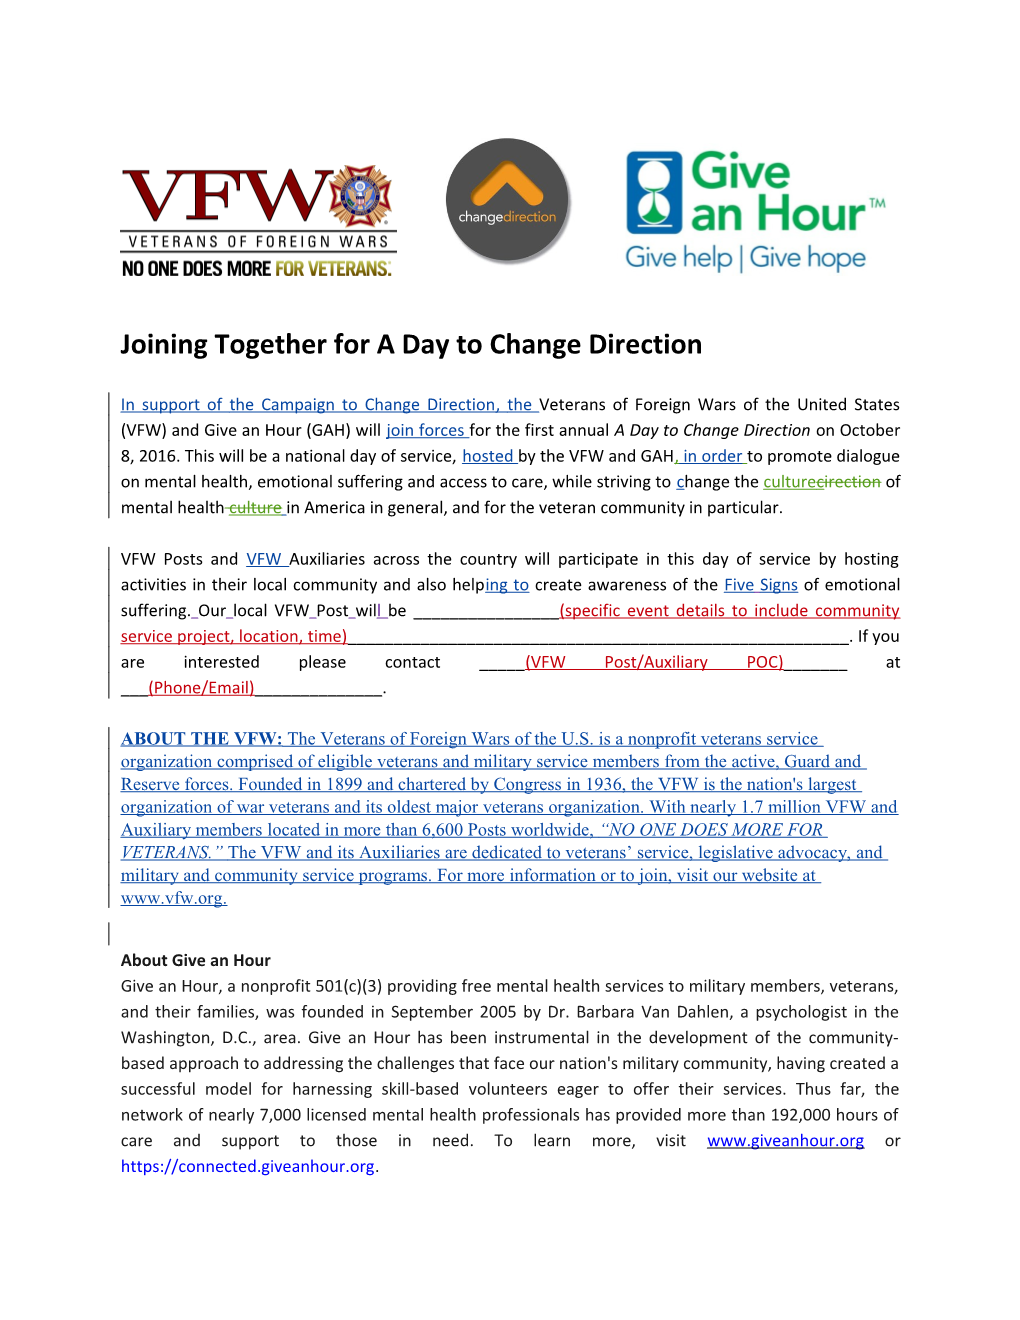 Joining Together for a Day to Change Direction